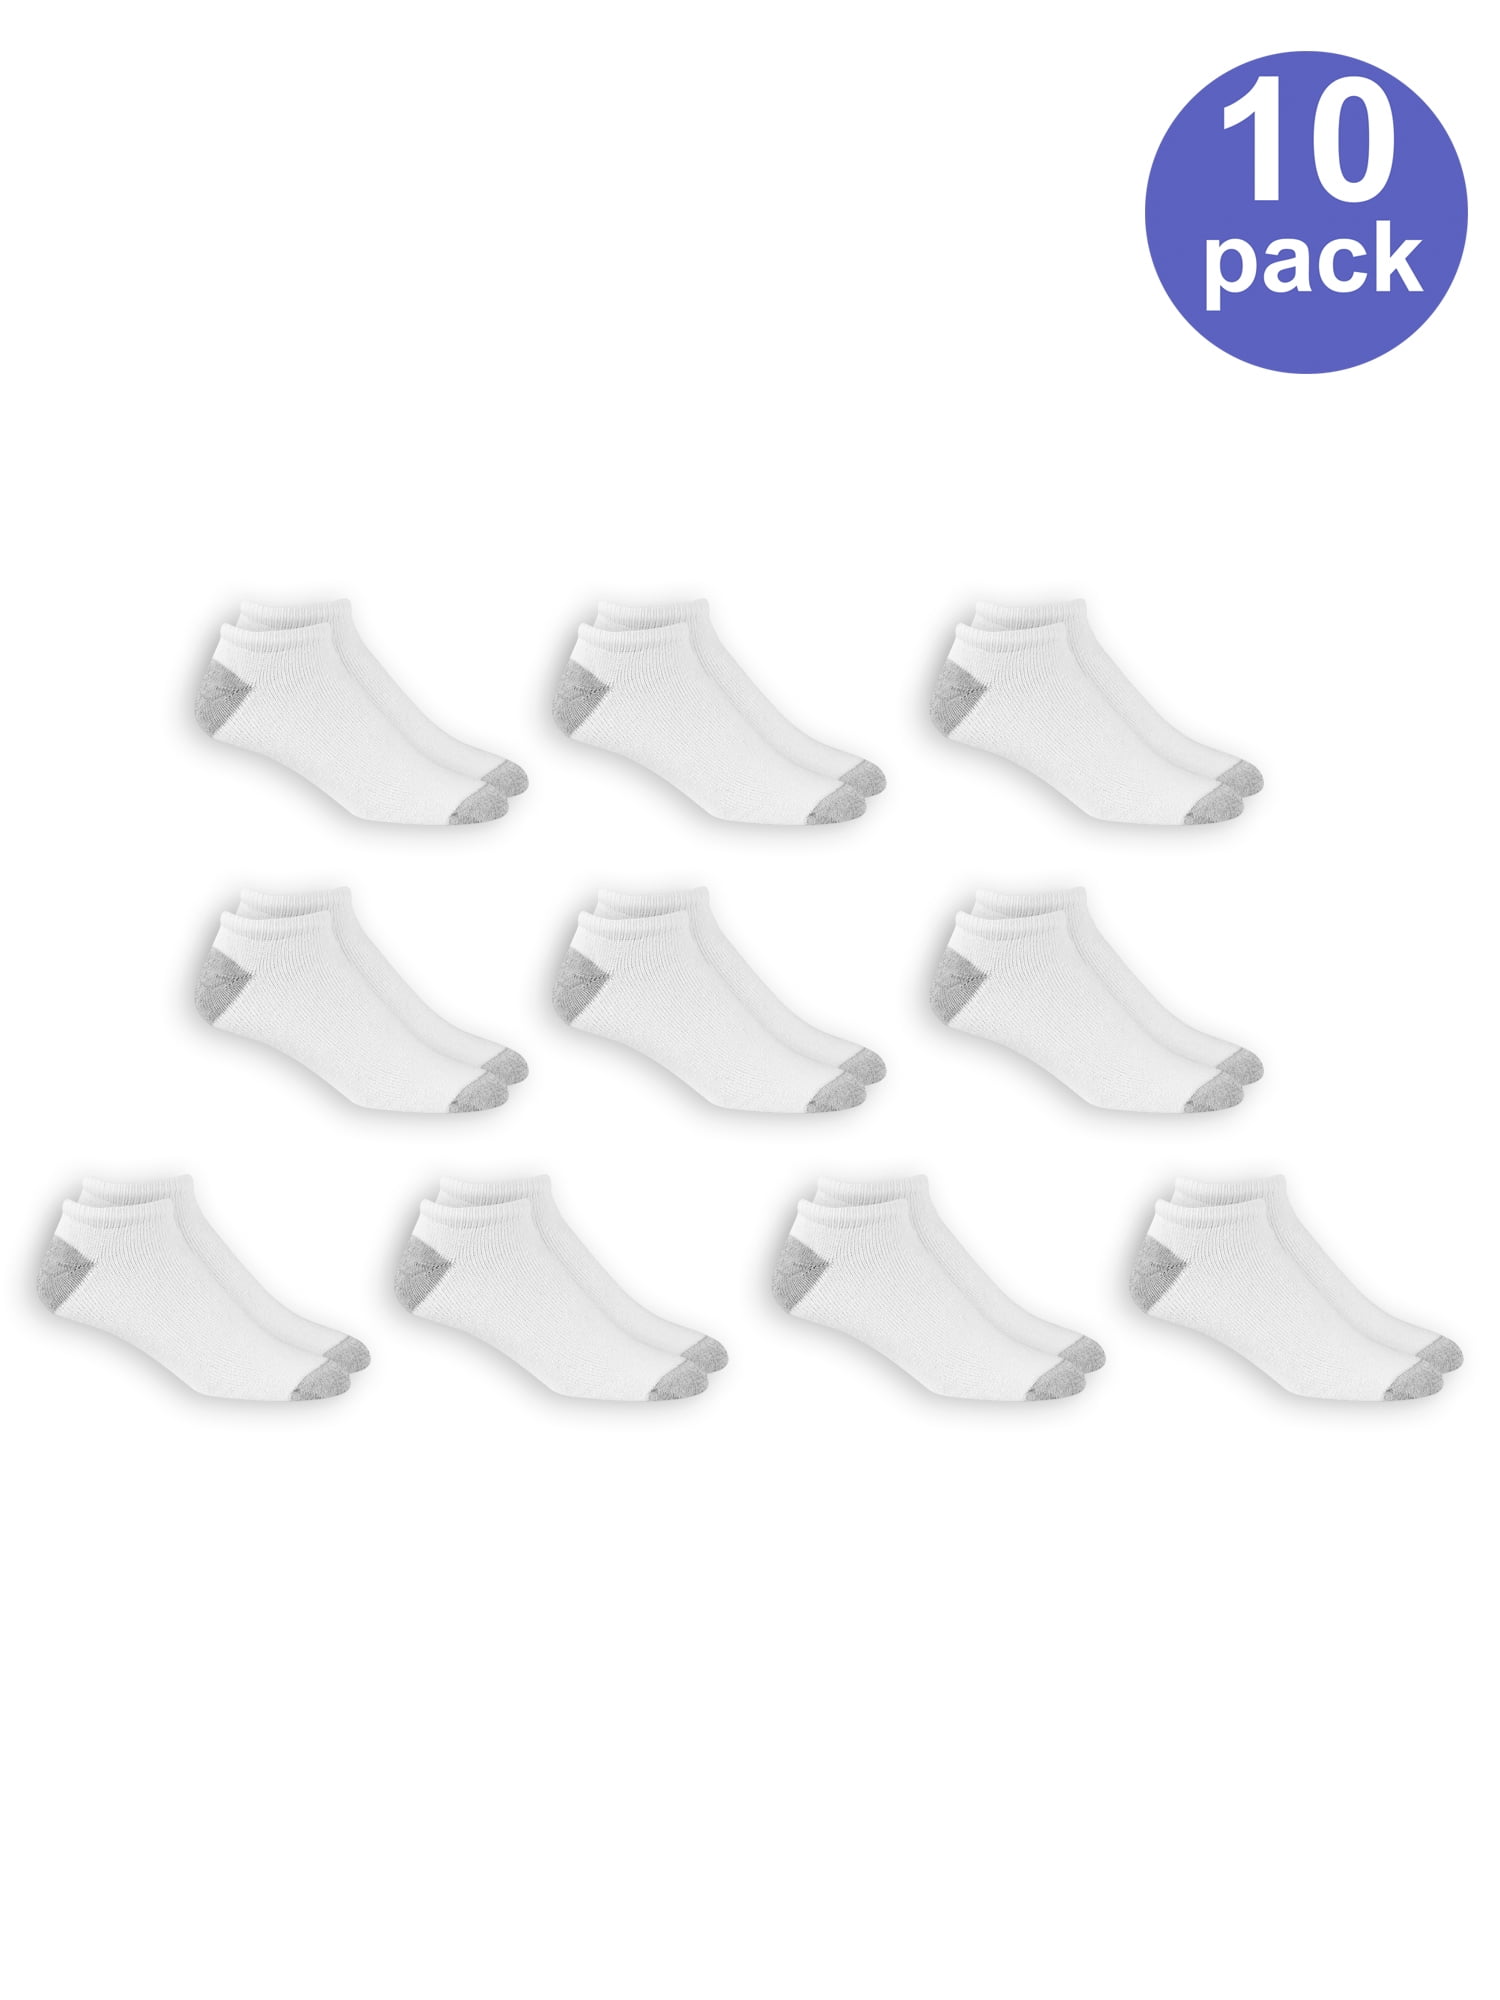 Mens Low Cut Socks Ankle Athletic Performance Workout 6//10 Value Pack